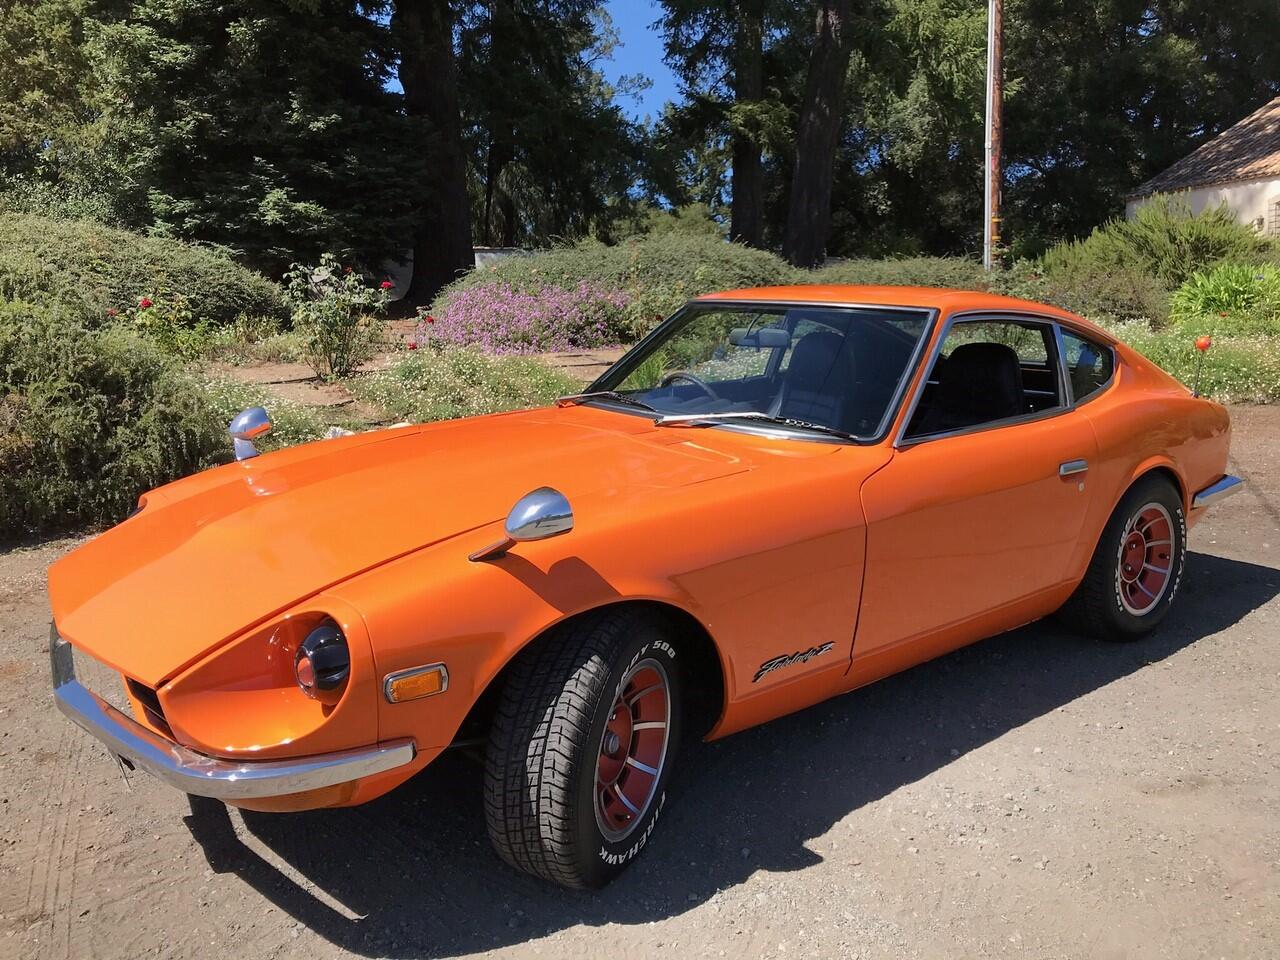 Extremely rare JDM right-hand drive 1970 Fairlady Z For Sale